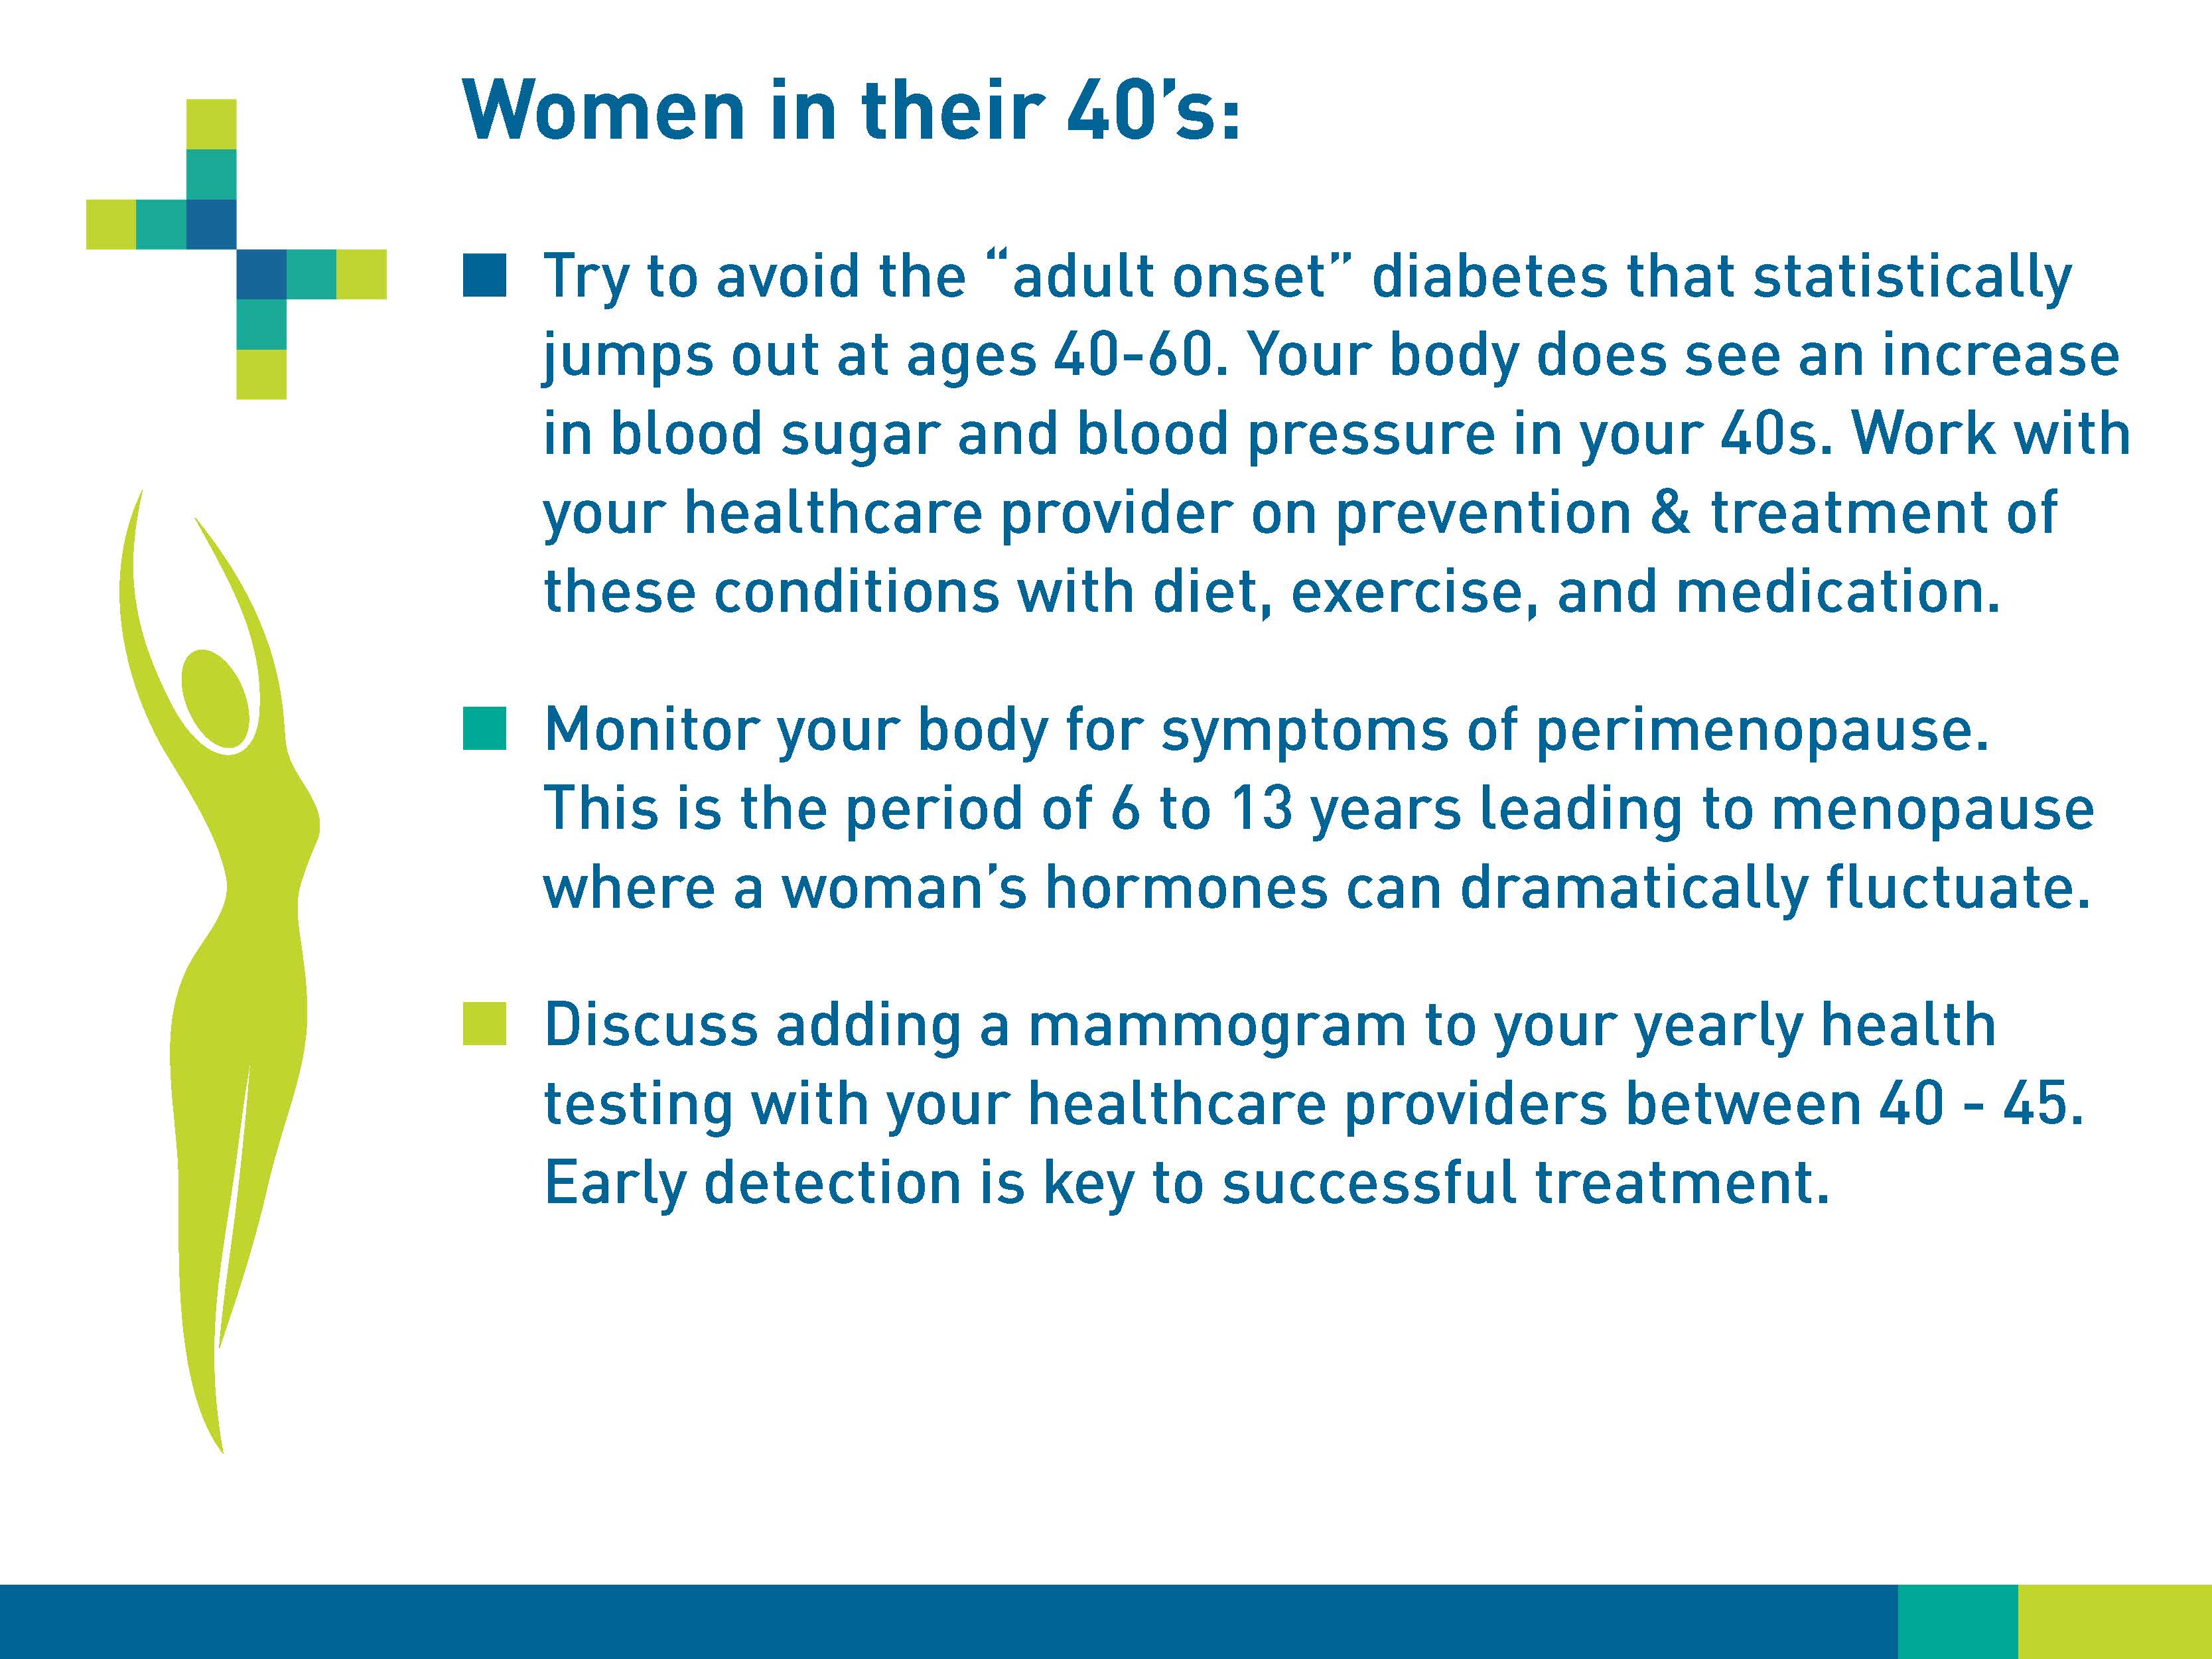 Women in their 40s: Try to avoid the “adult onset” diabetes that statistically jumps out at age 40-60. Your body does see an increase in blood sugar and blood pressure in your 40s. Work with your healthcare provider on prevention & treatment of these conditions with diet, exercise, and medication. Monitor your body for symptoms of perimenopause. This is the period of 6 to 13 years leading to menopause where a woman's hormones can dramatically fluctuate. Discuss adding a mammogram to your yearly health testing with your healthcare providers between 40-45. Early detection is key to successful treatment.